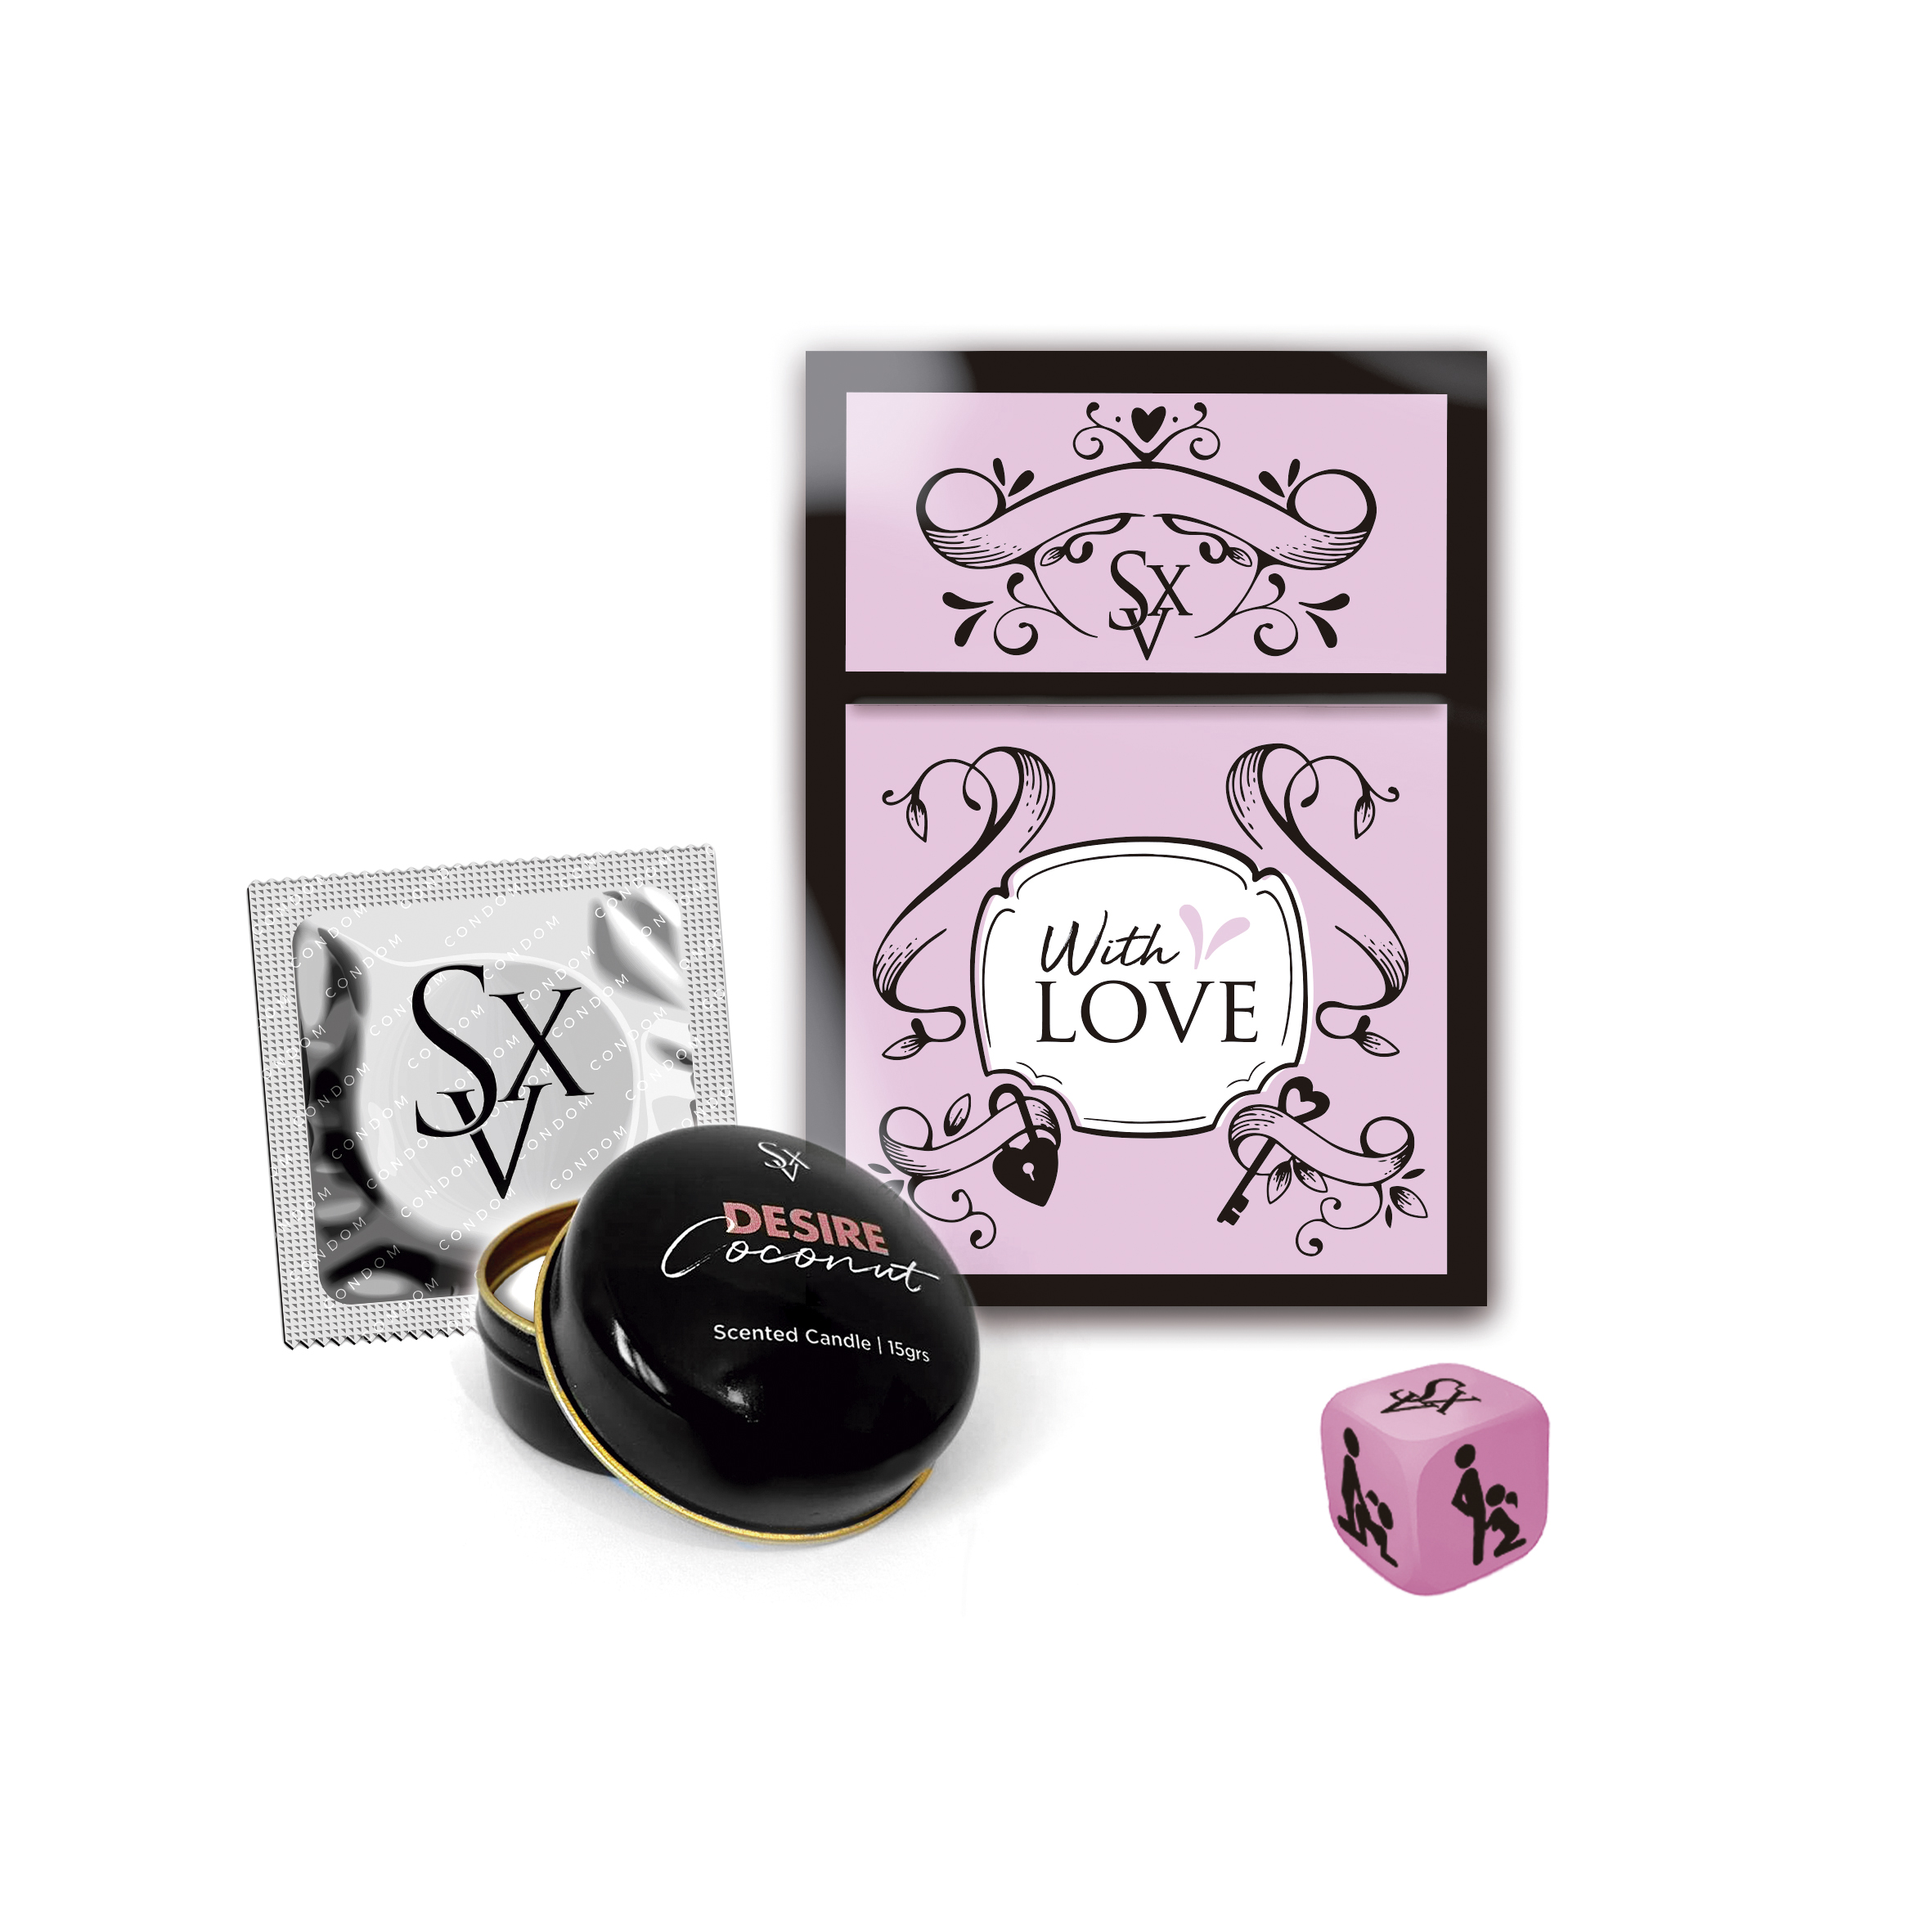 Love Kit 01 Exclusive for lovers